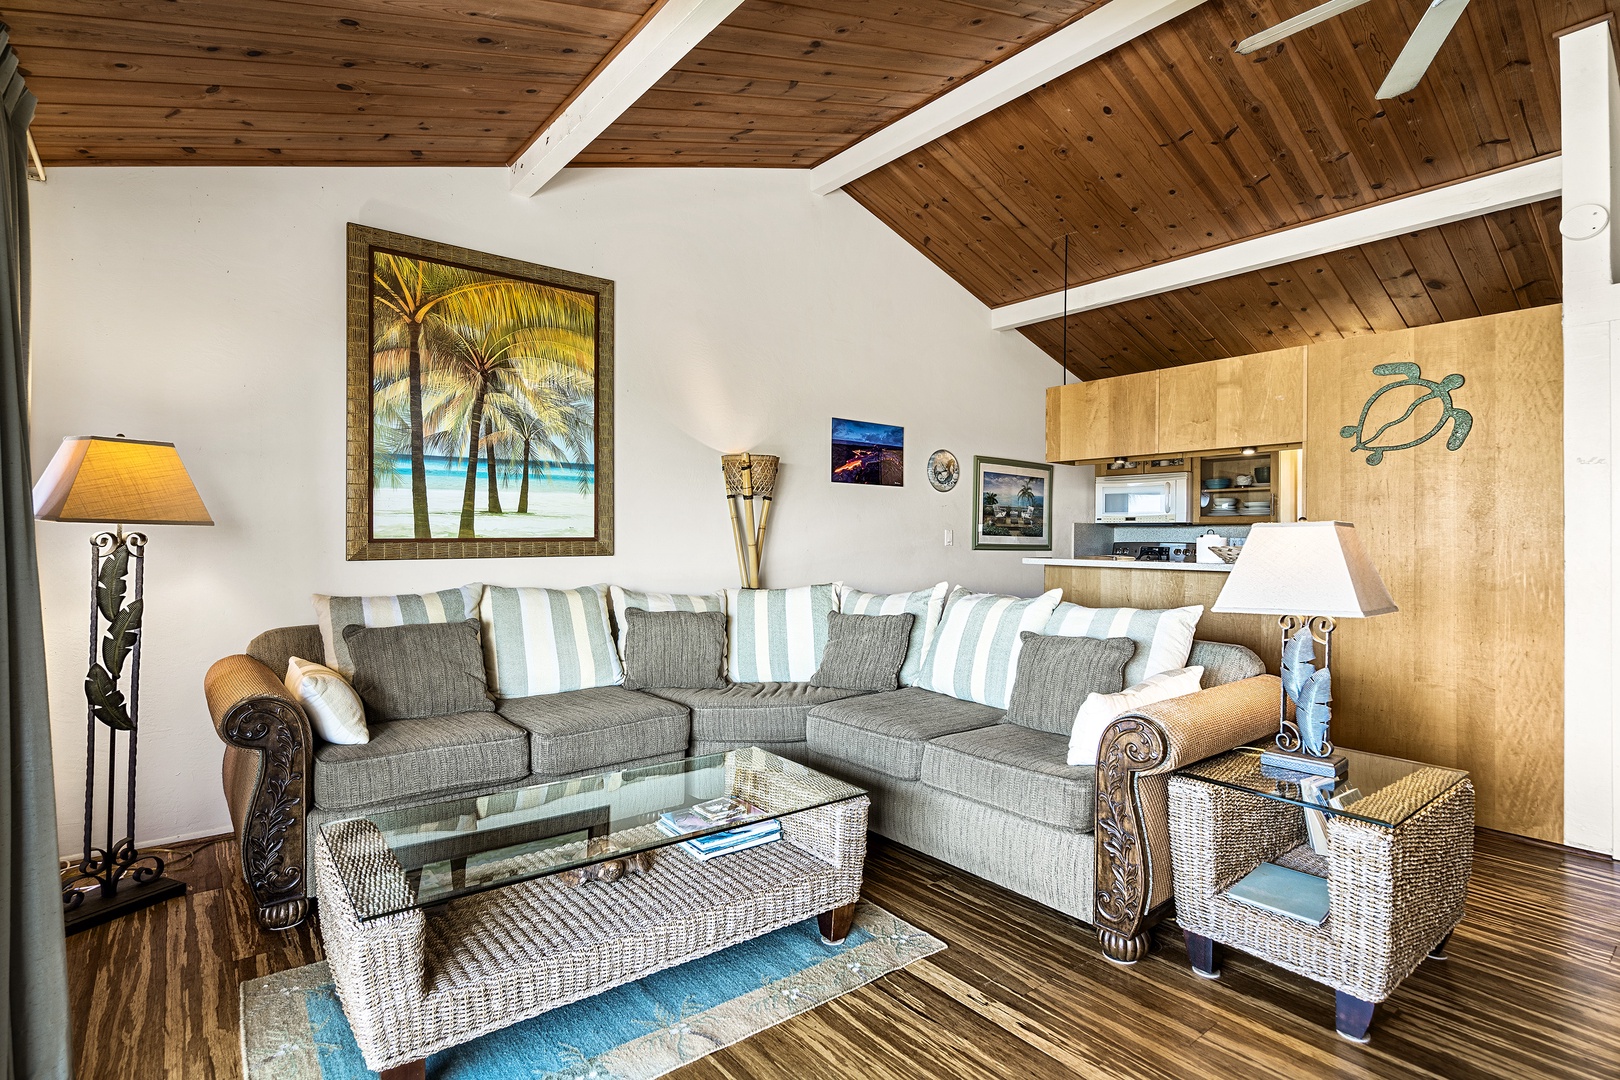 Kailua Kona Vacation Rentals, Keauhou Resort 125 - Open sightlines through the living room, kitchen and dining area